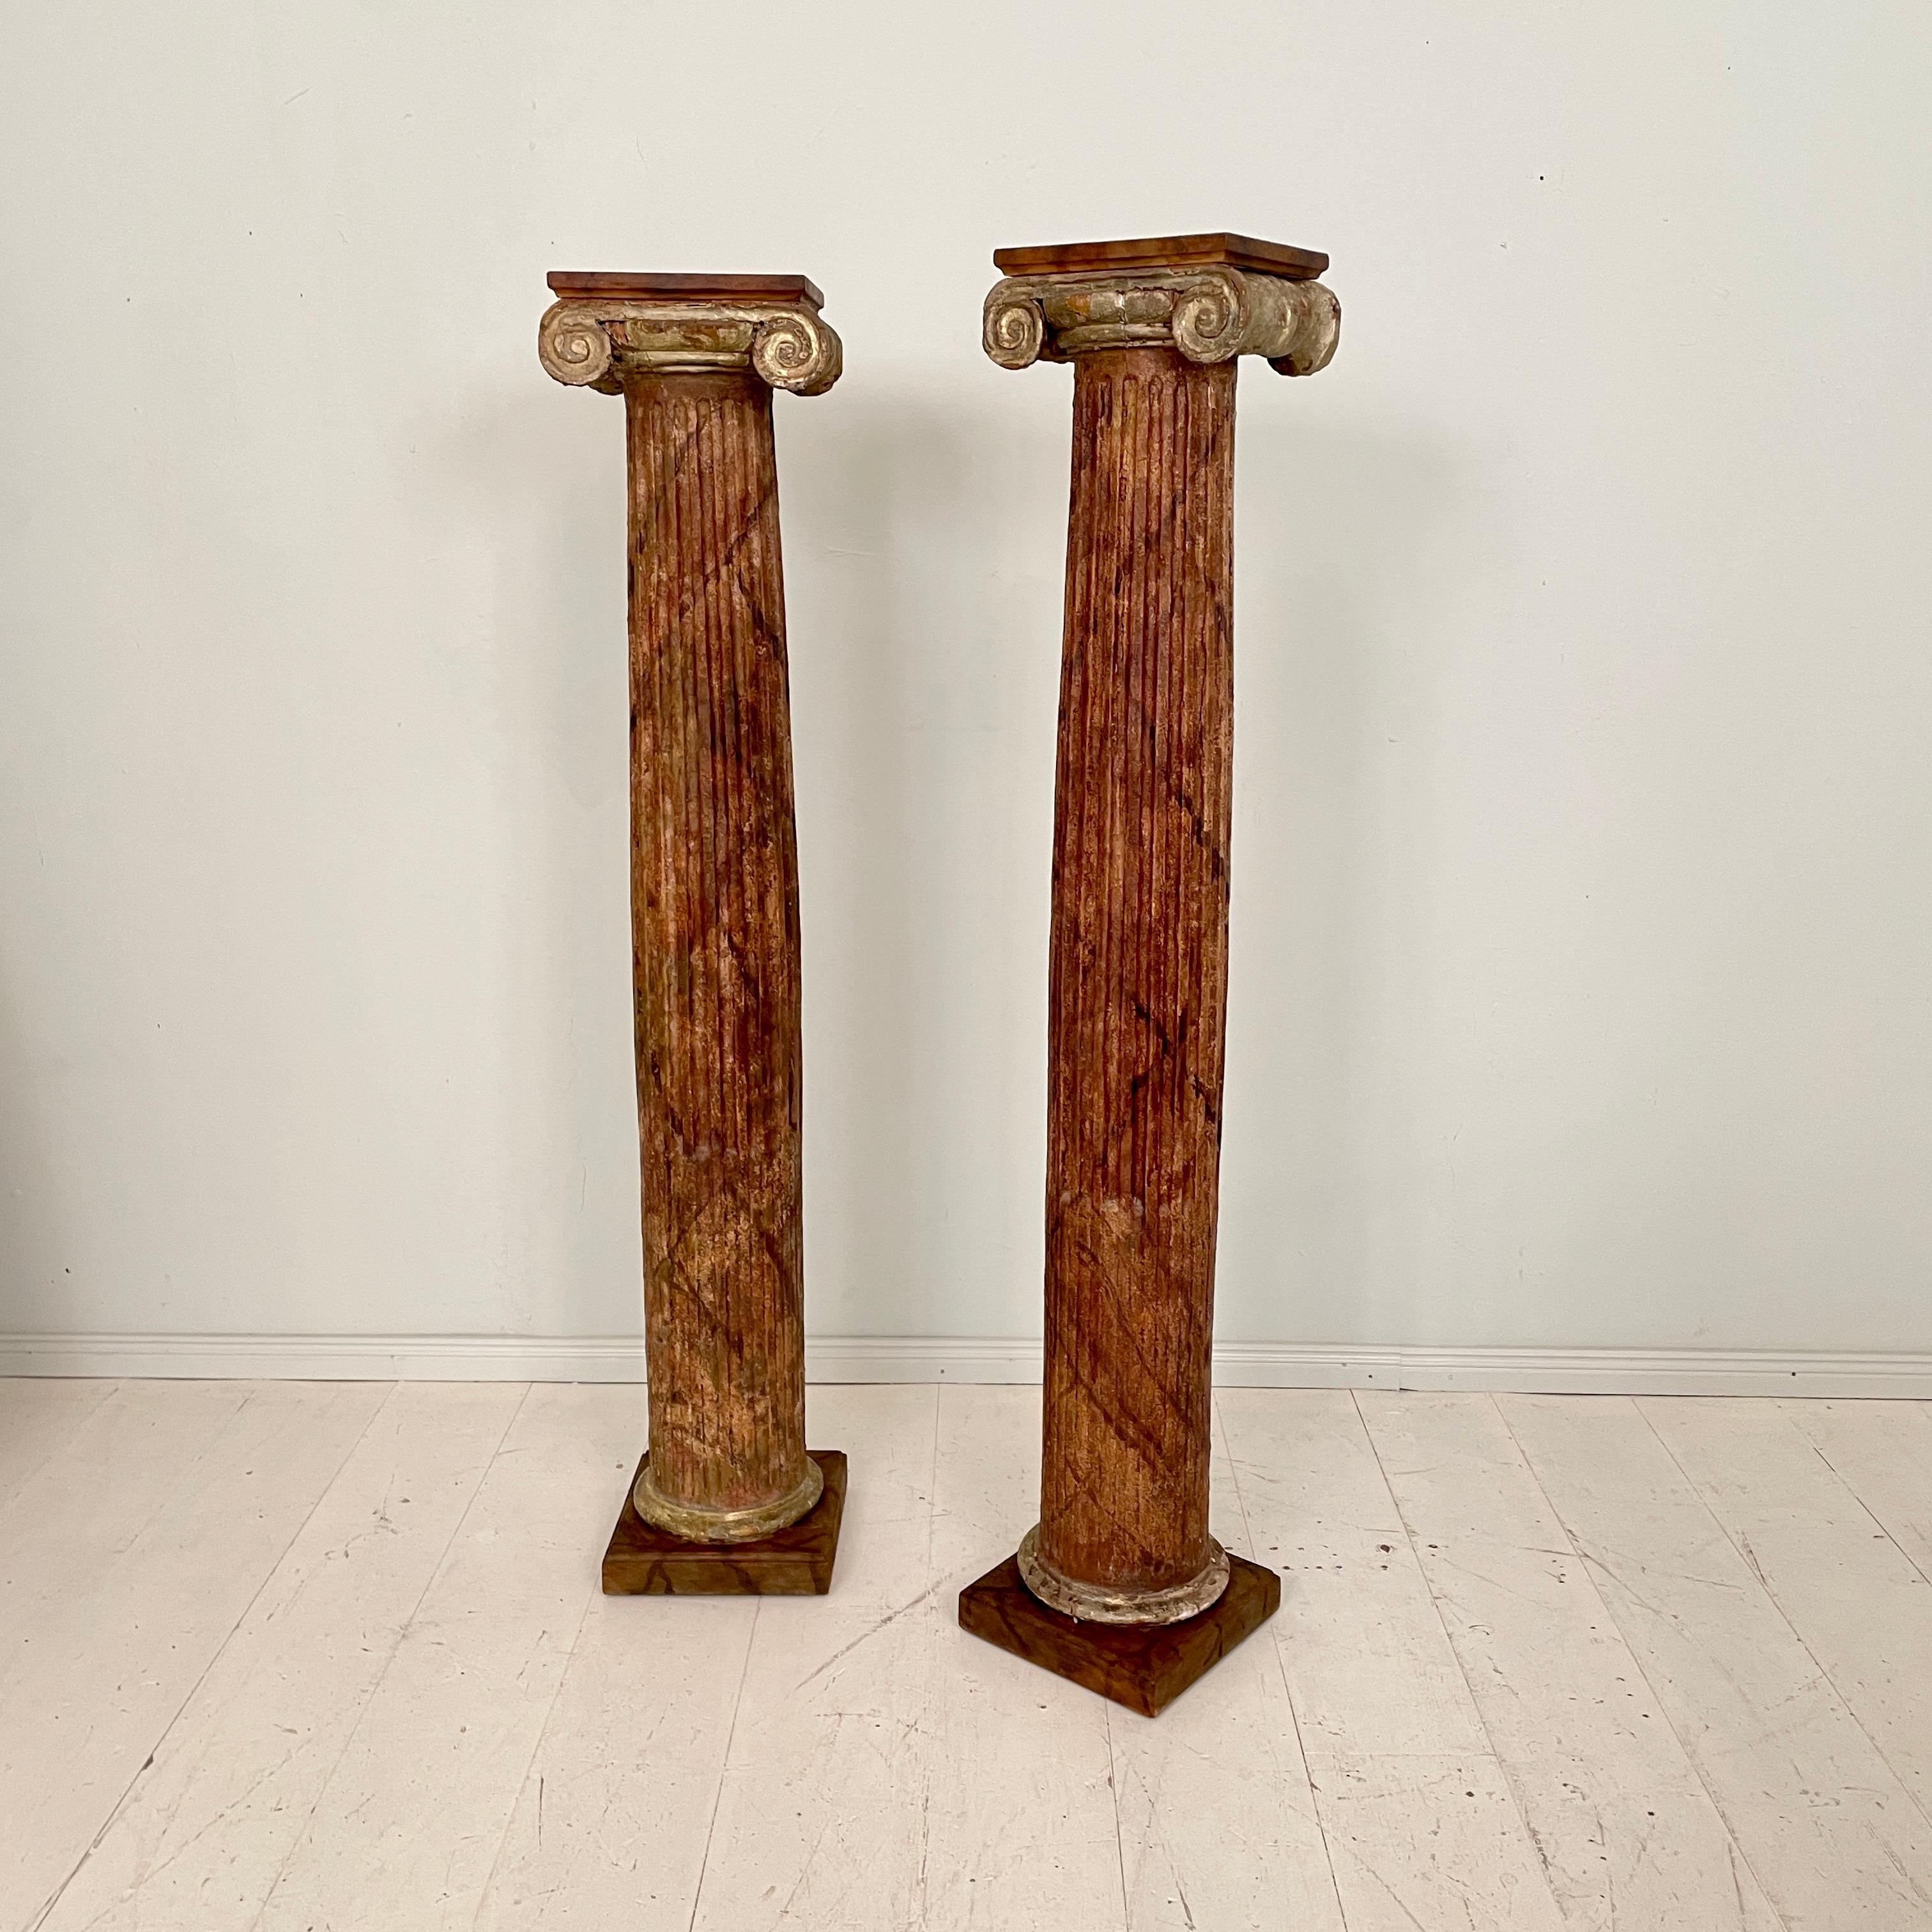 Oak Early 19th Century Pair of Wood Columns Lacquered in Faux Marble, Around 1800 For Sale